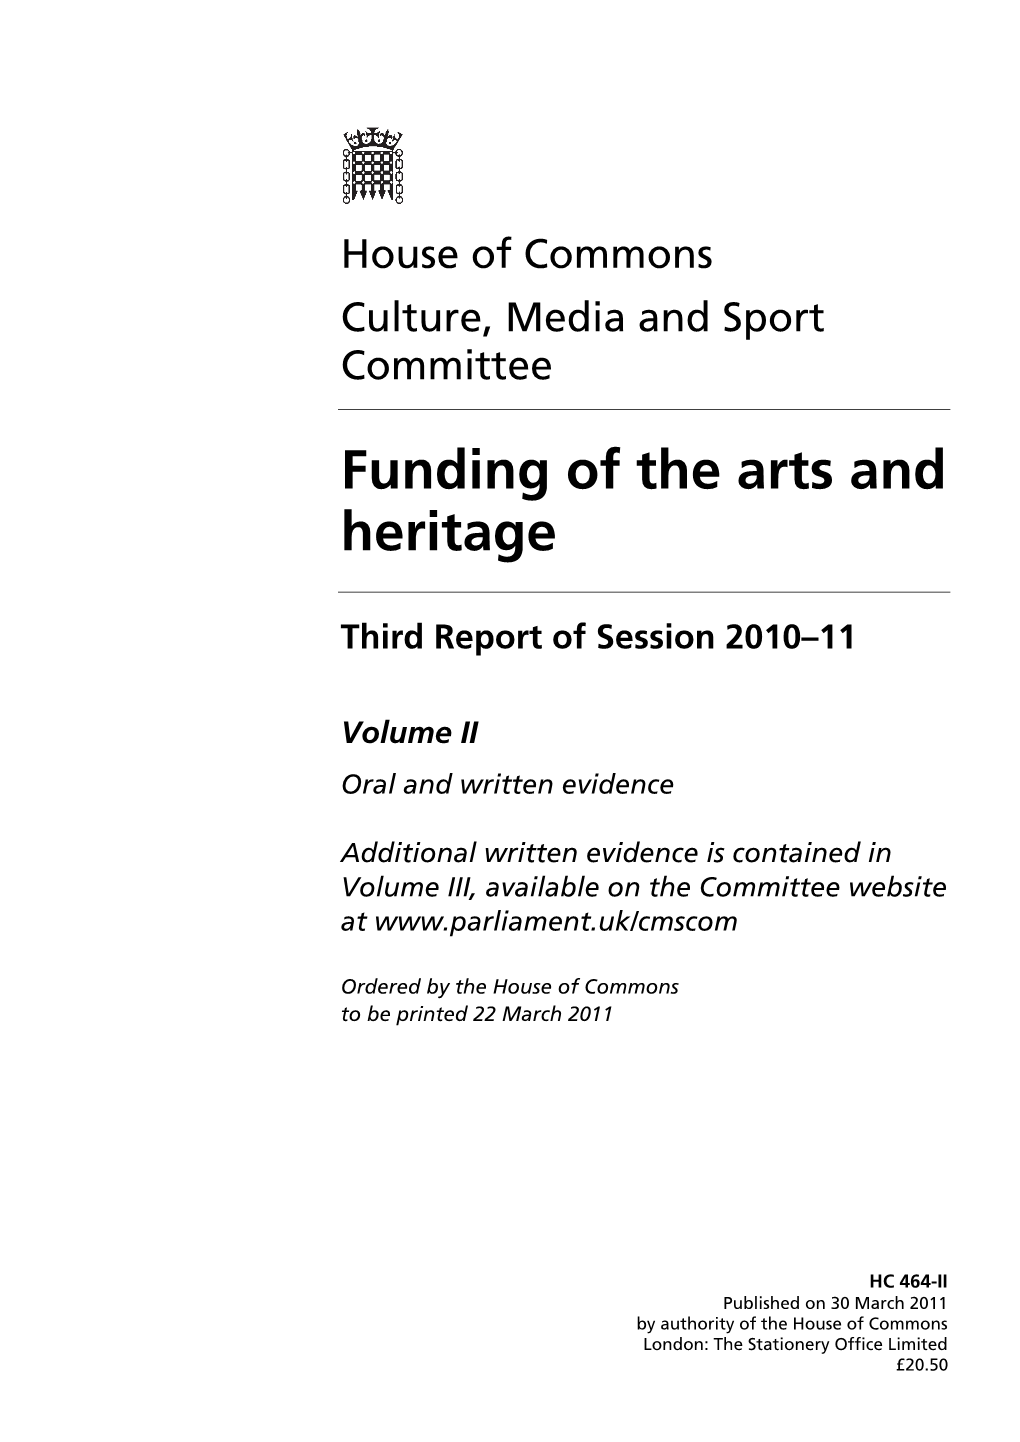 Funding of the Arts and Heritage